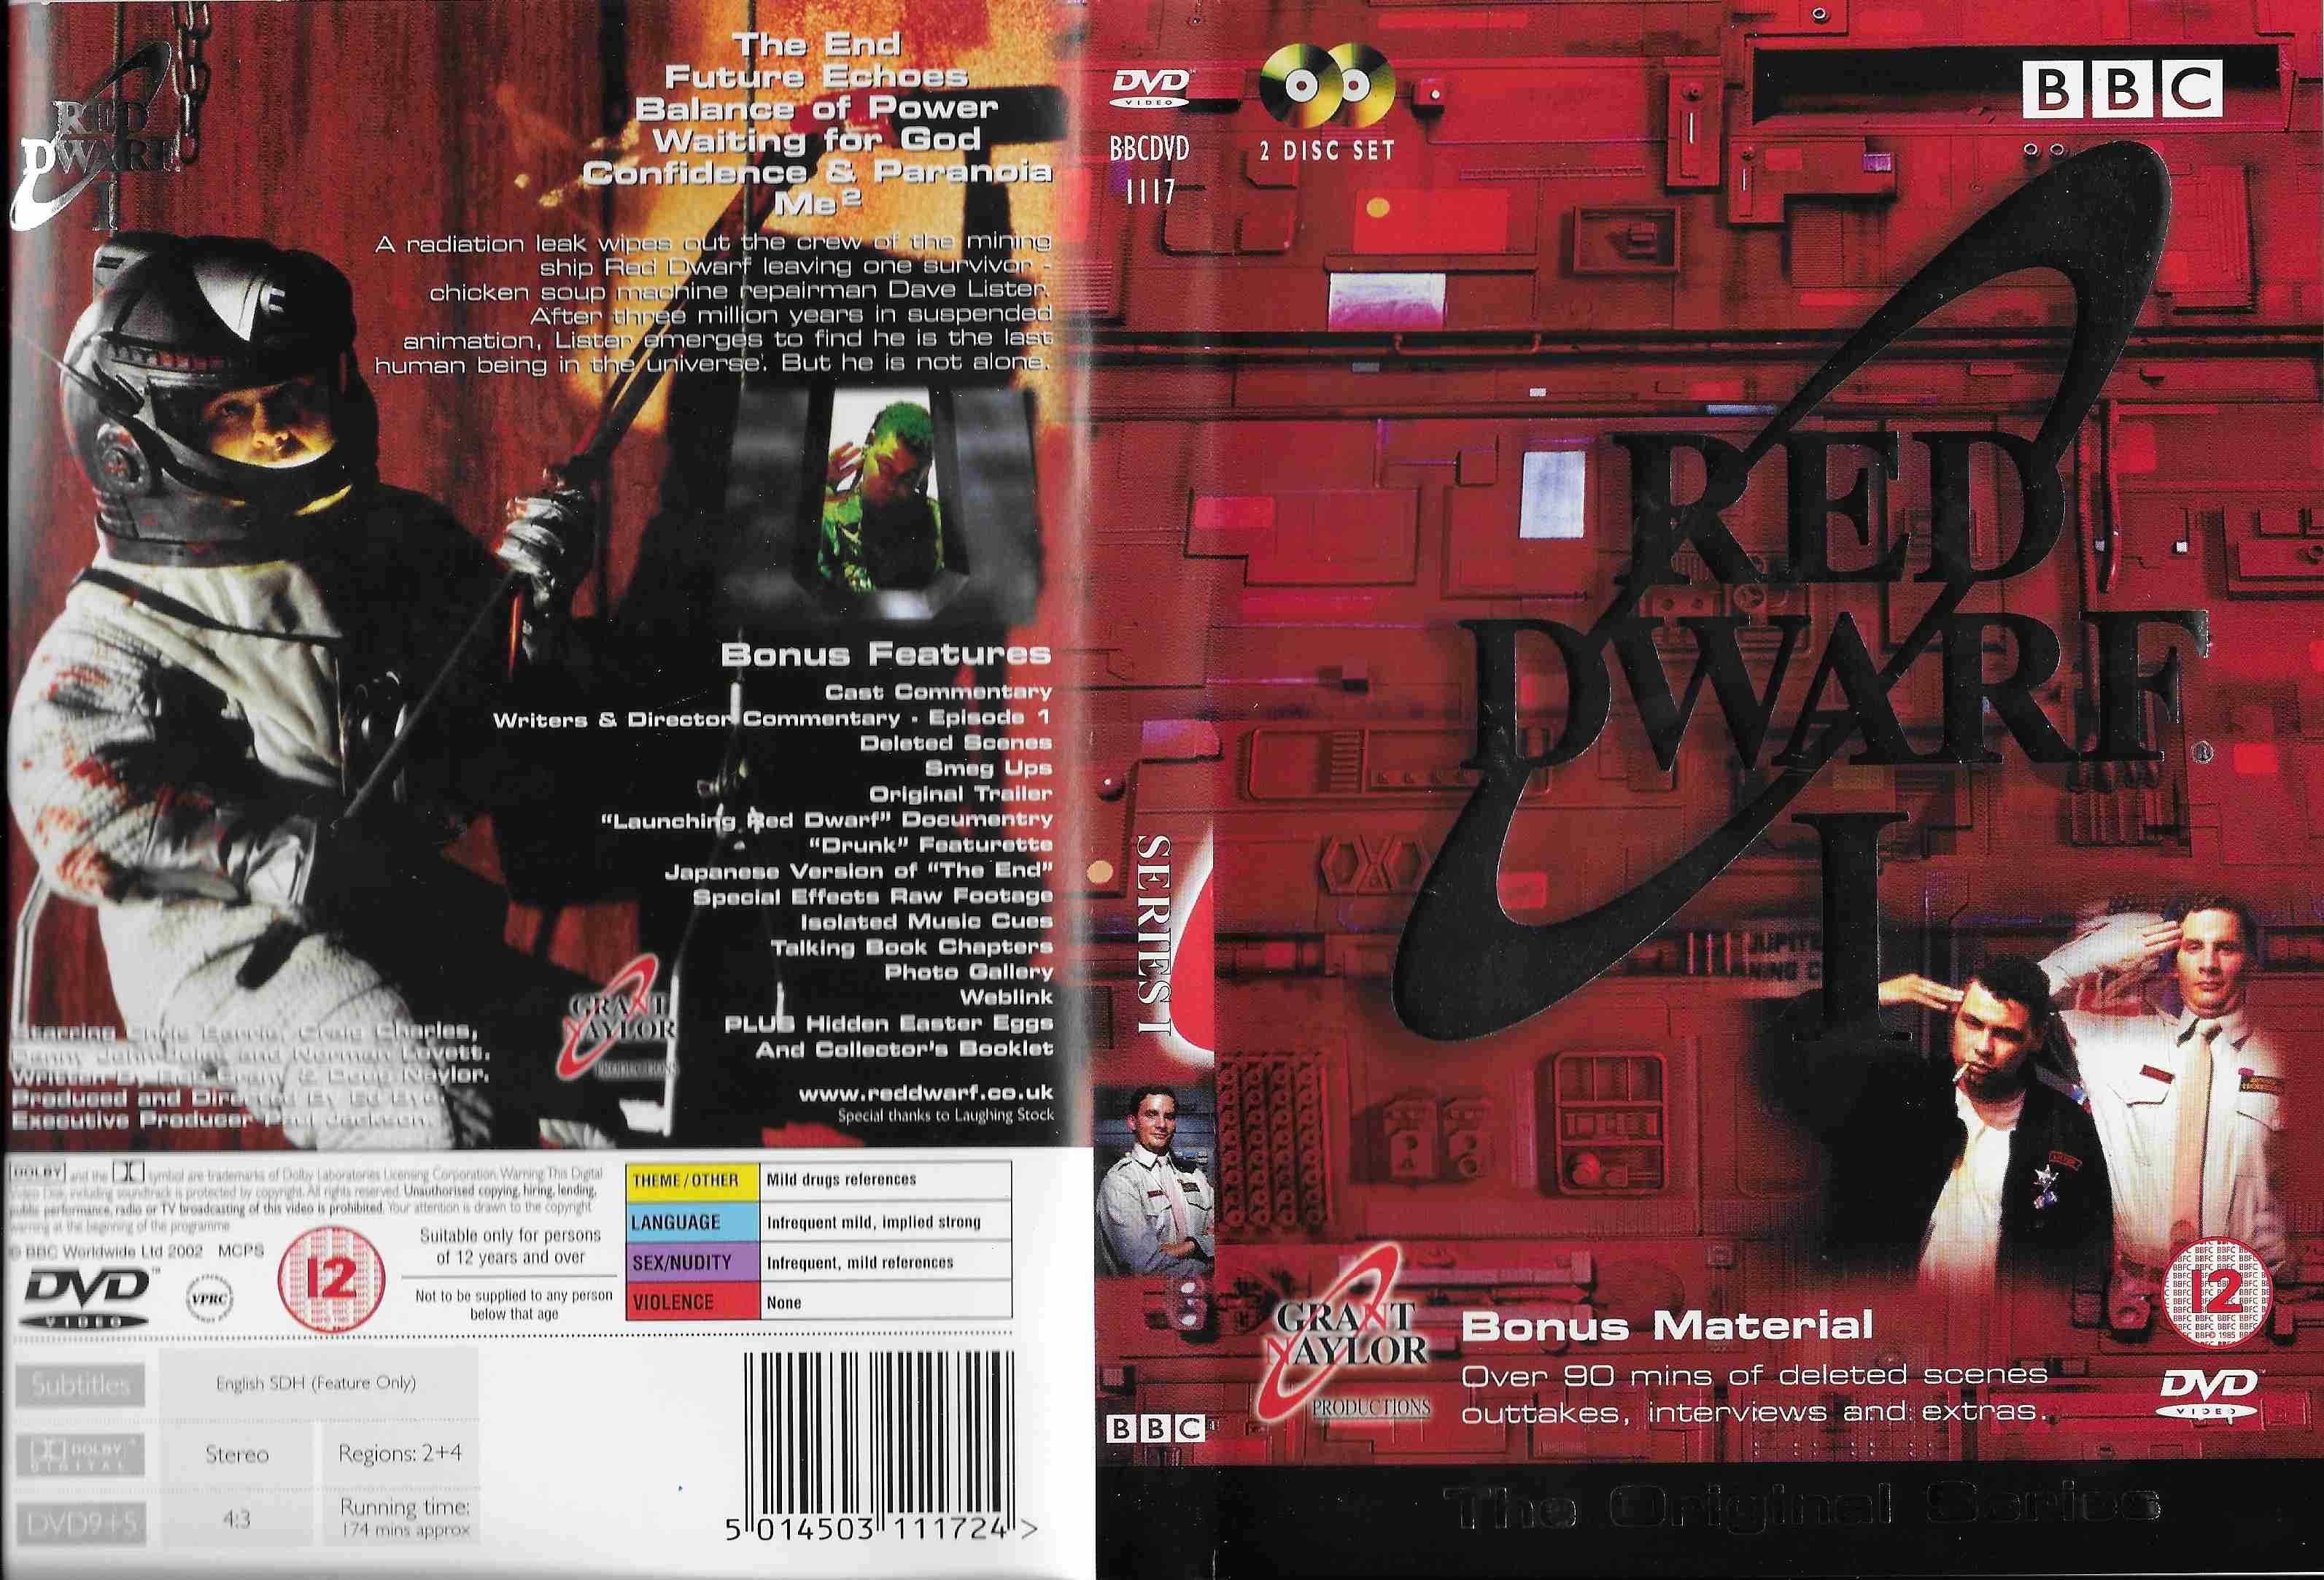 Picture of BBCDVD 1117 Red dwarf - Series I by artist Rob Grant / Doug Naylor from the BBC records and Tapes library